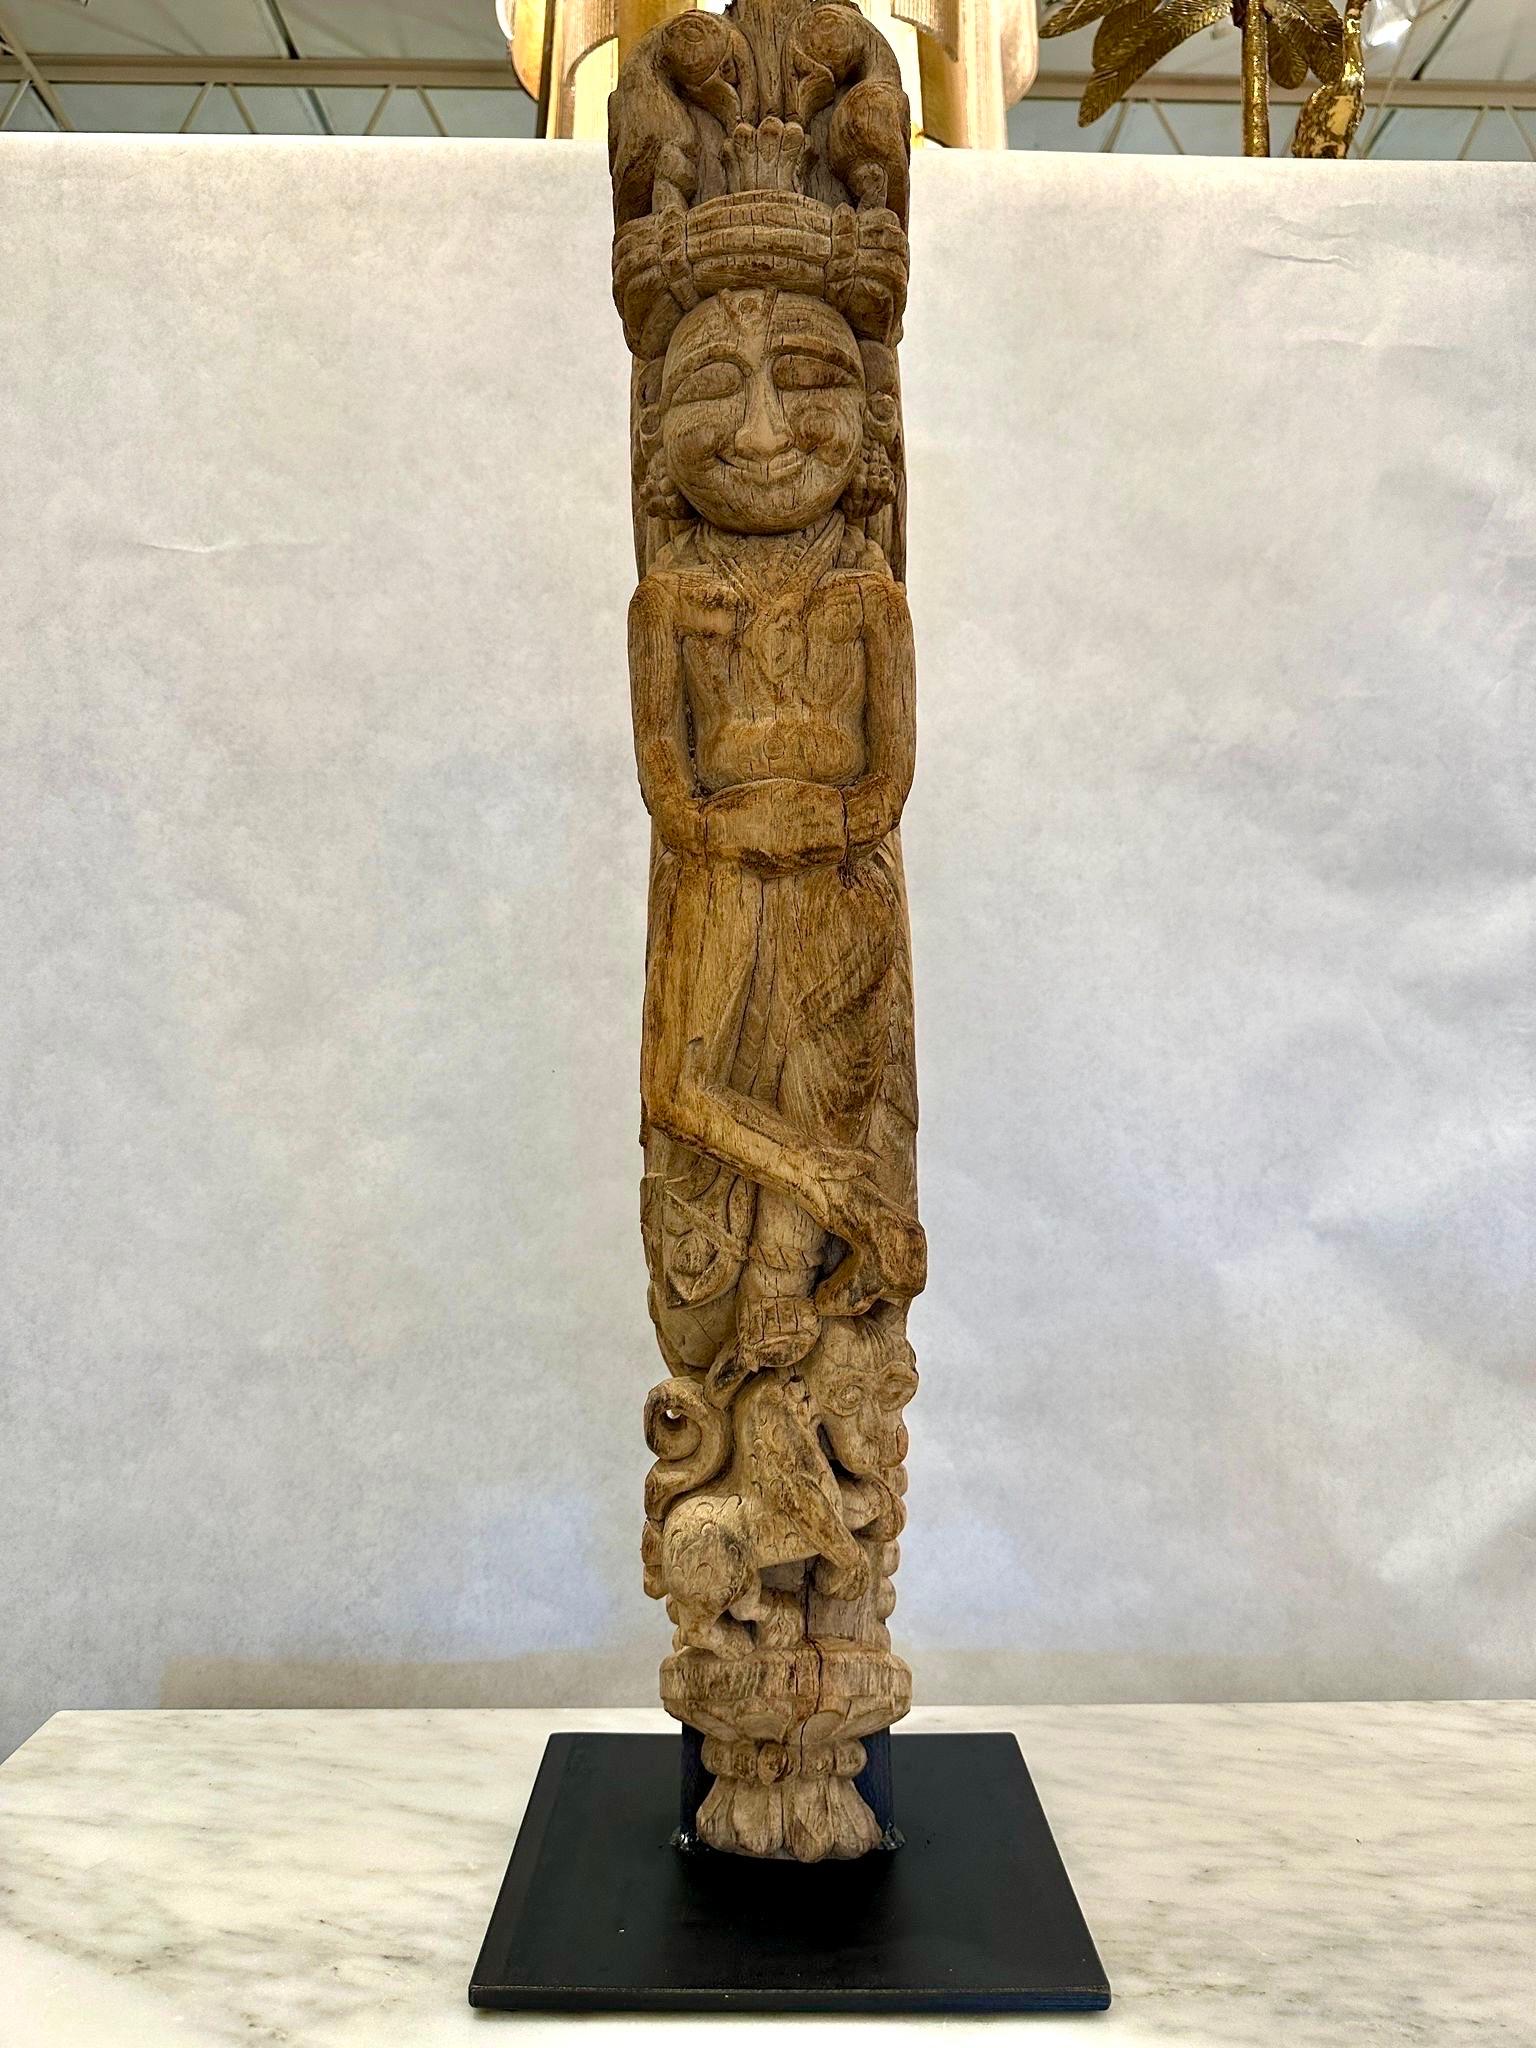 This roof mounted decorative element of a carved Buddha, was salvaged from a 19th C. Balinese building and we had it professionally mounted on an iron display base so as to highlight its amazing carvings and details.  NOTE: THIS ITEM IS LOCATED AND